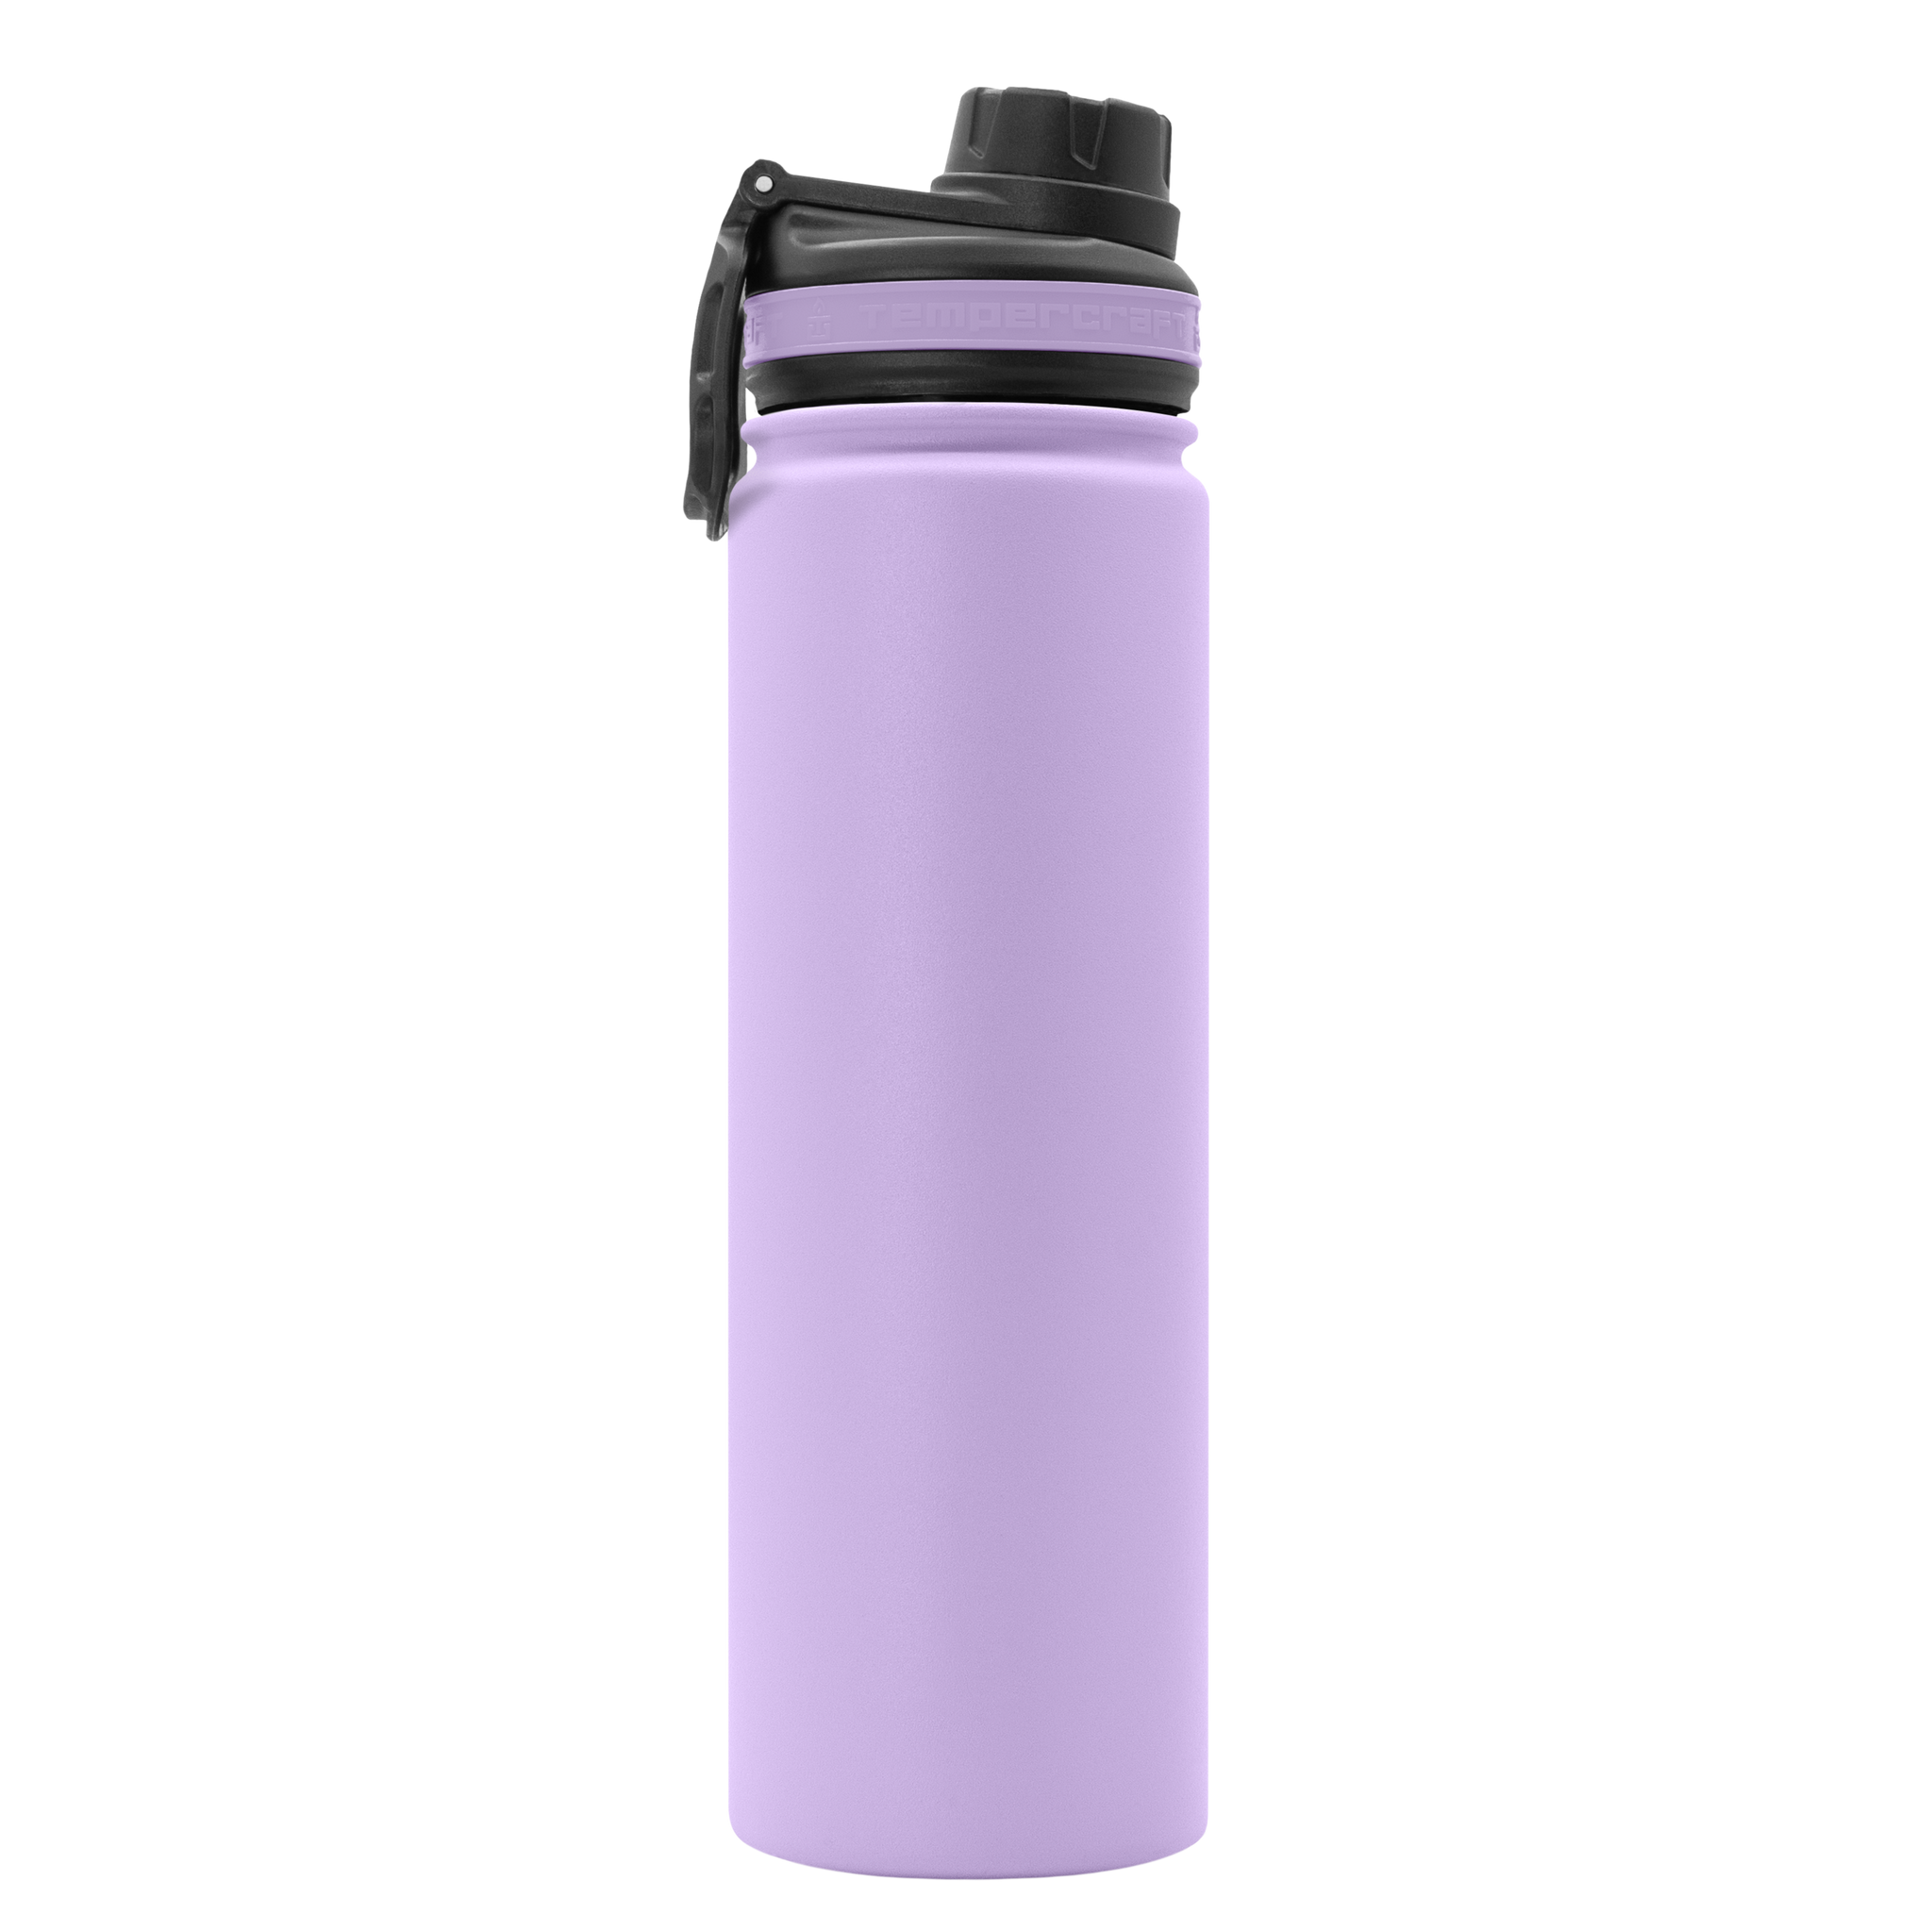 ThermoFlask 22 oz Insulated Stainless Steel Chug Water Bottle